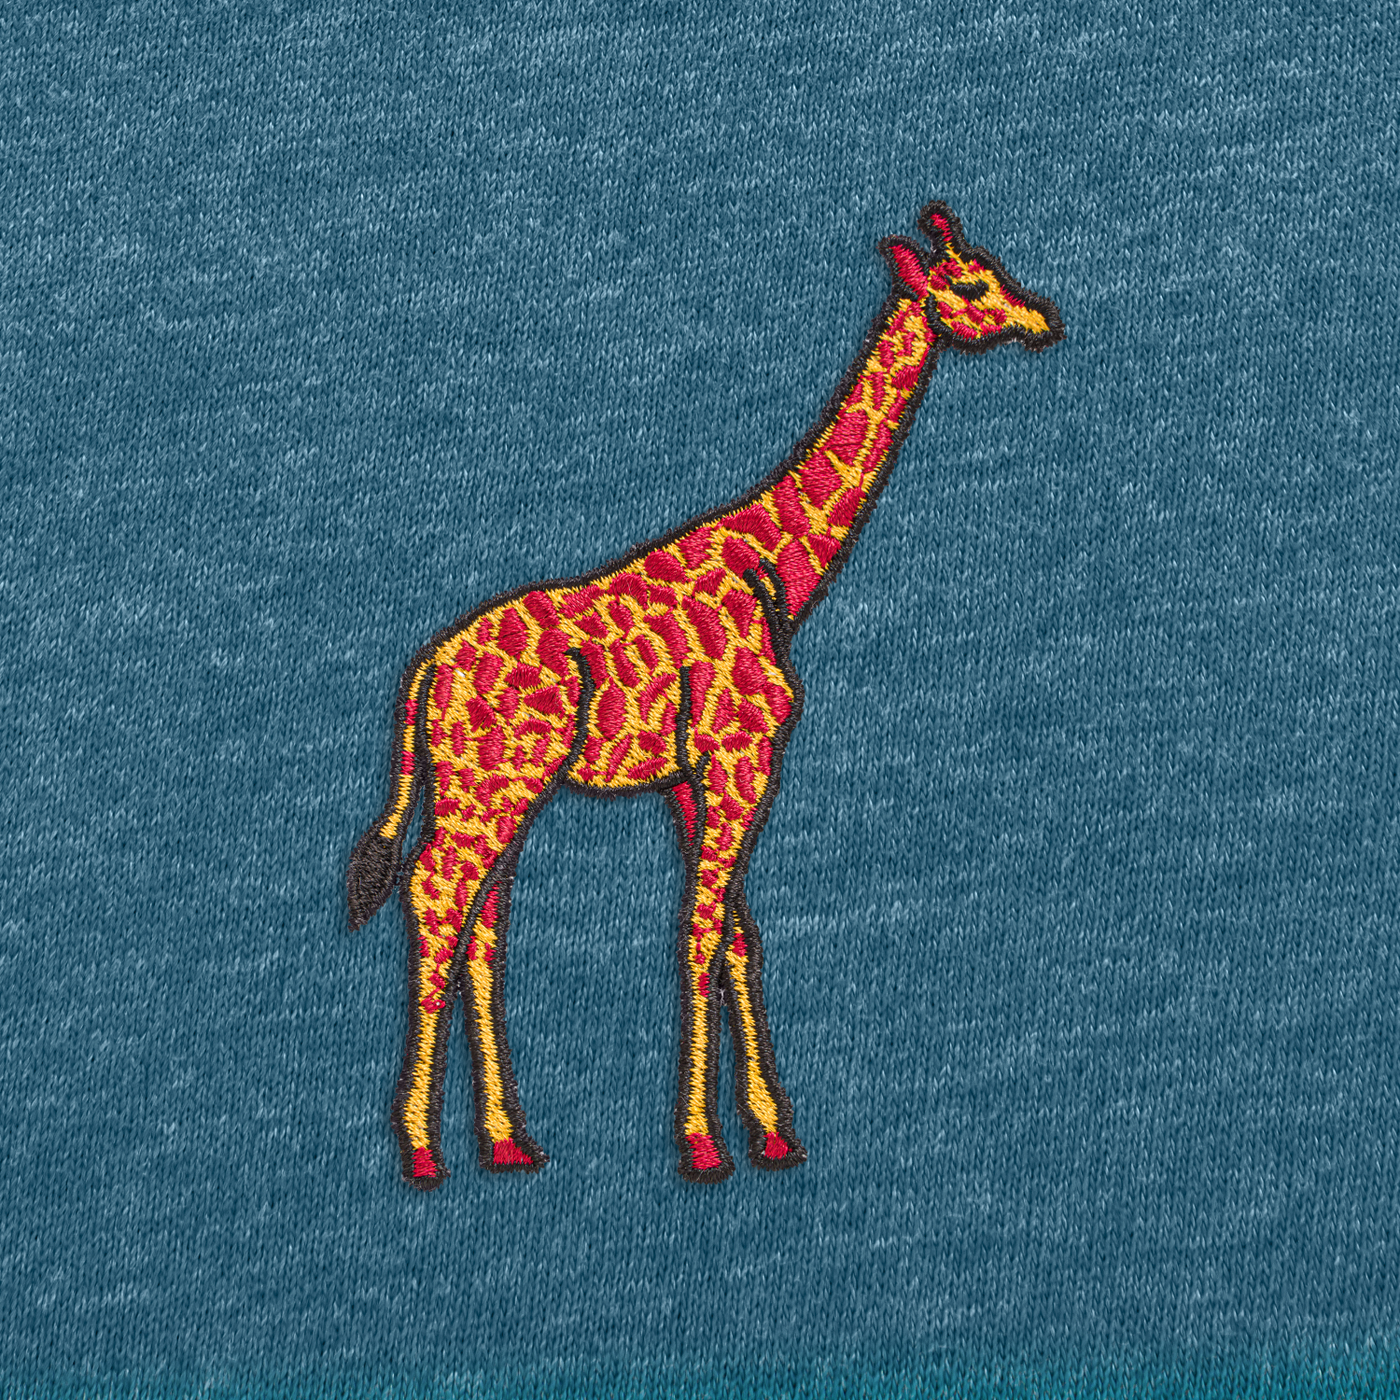 Bobby's Planet Men's Embroidered Giraffe T-Shirt from African Animals Collection in Heather Deep Teal Color#color_heather-deep-teal